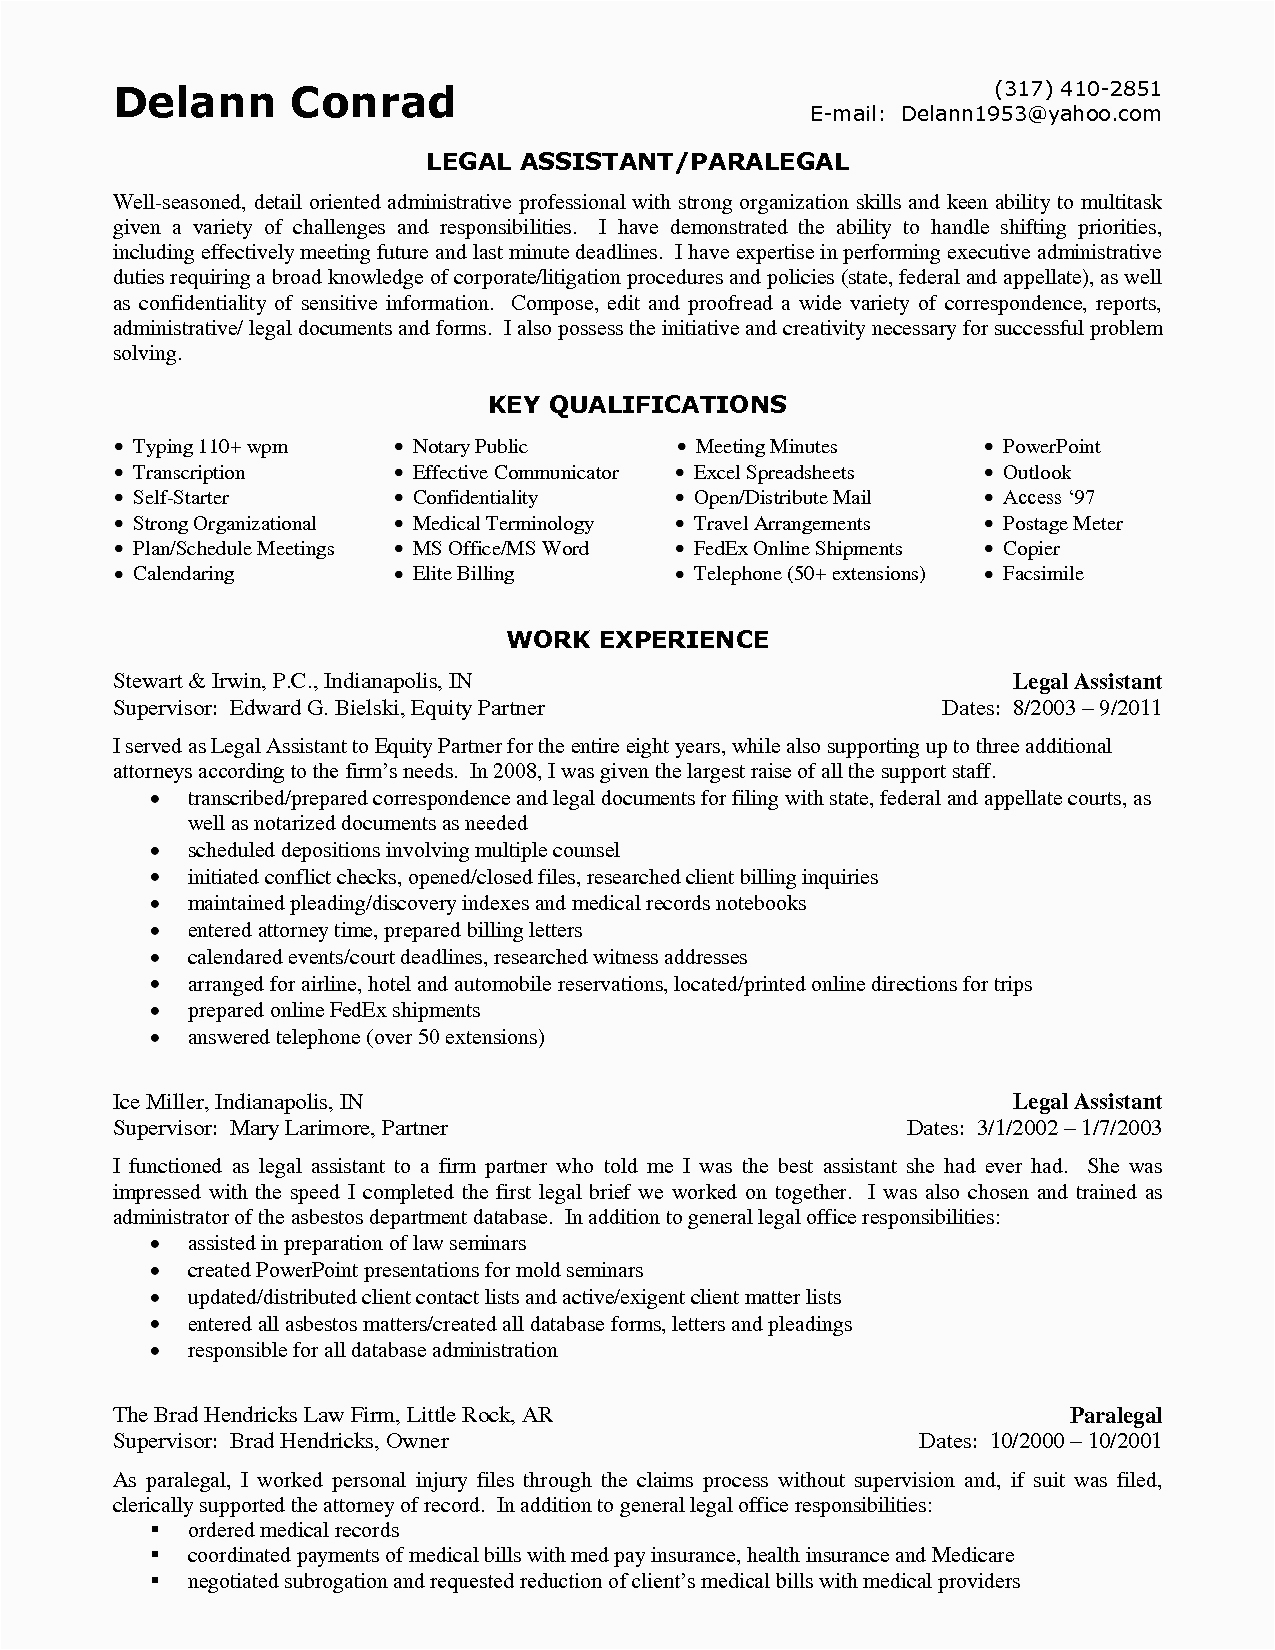 Personal Injury Legal assistant Resume Sample Entry Level Legal assistant Resume